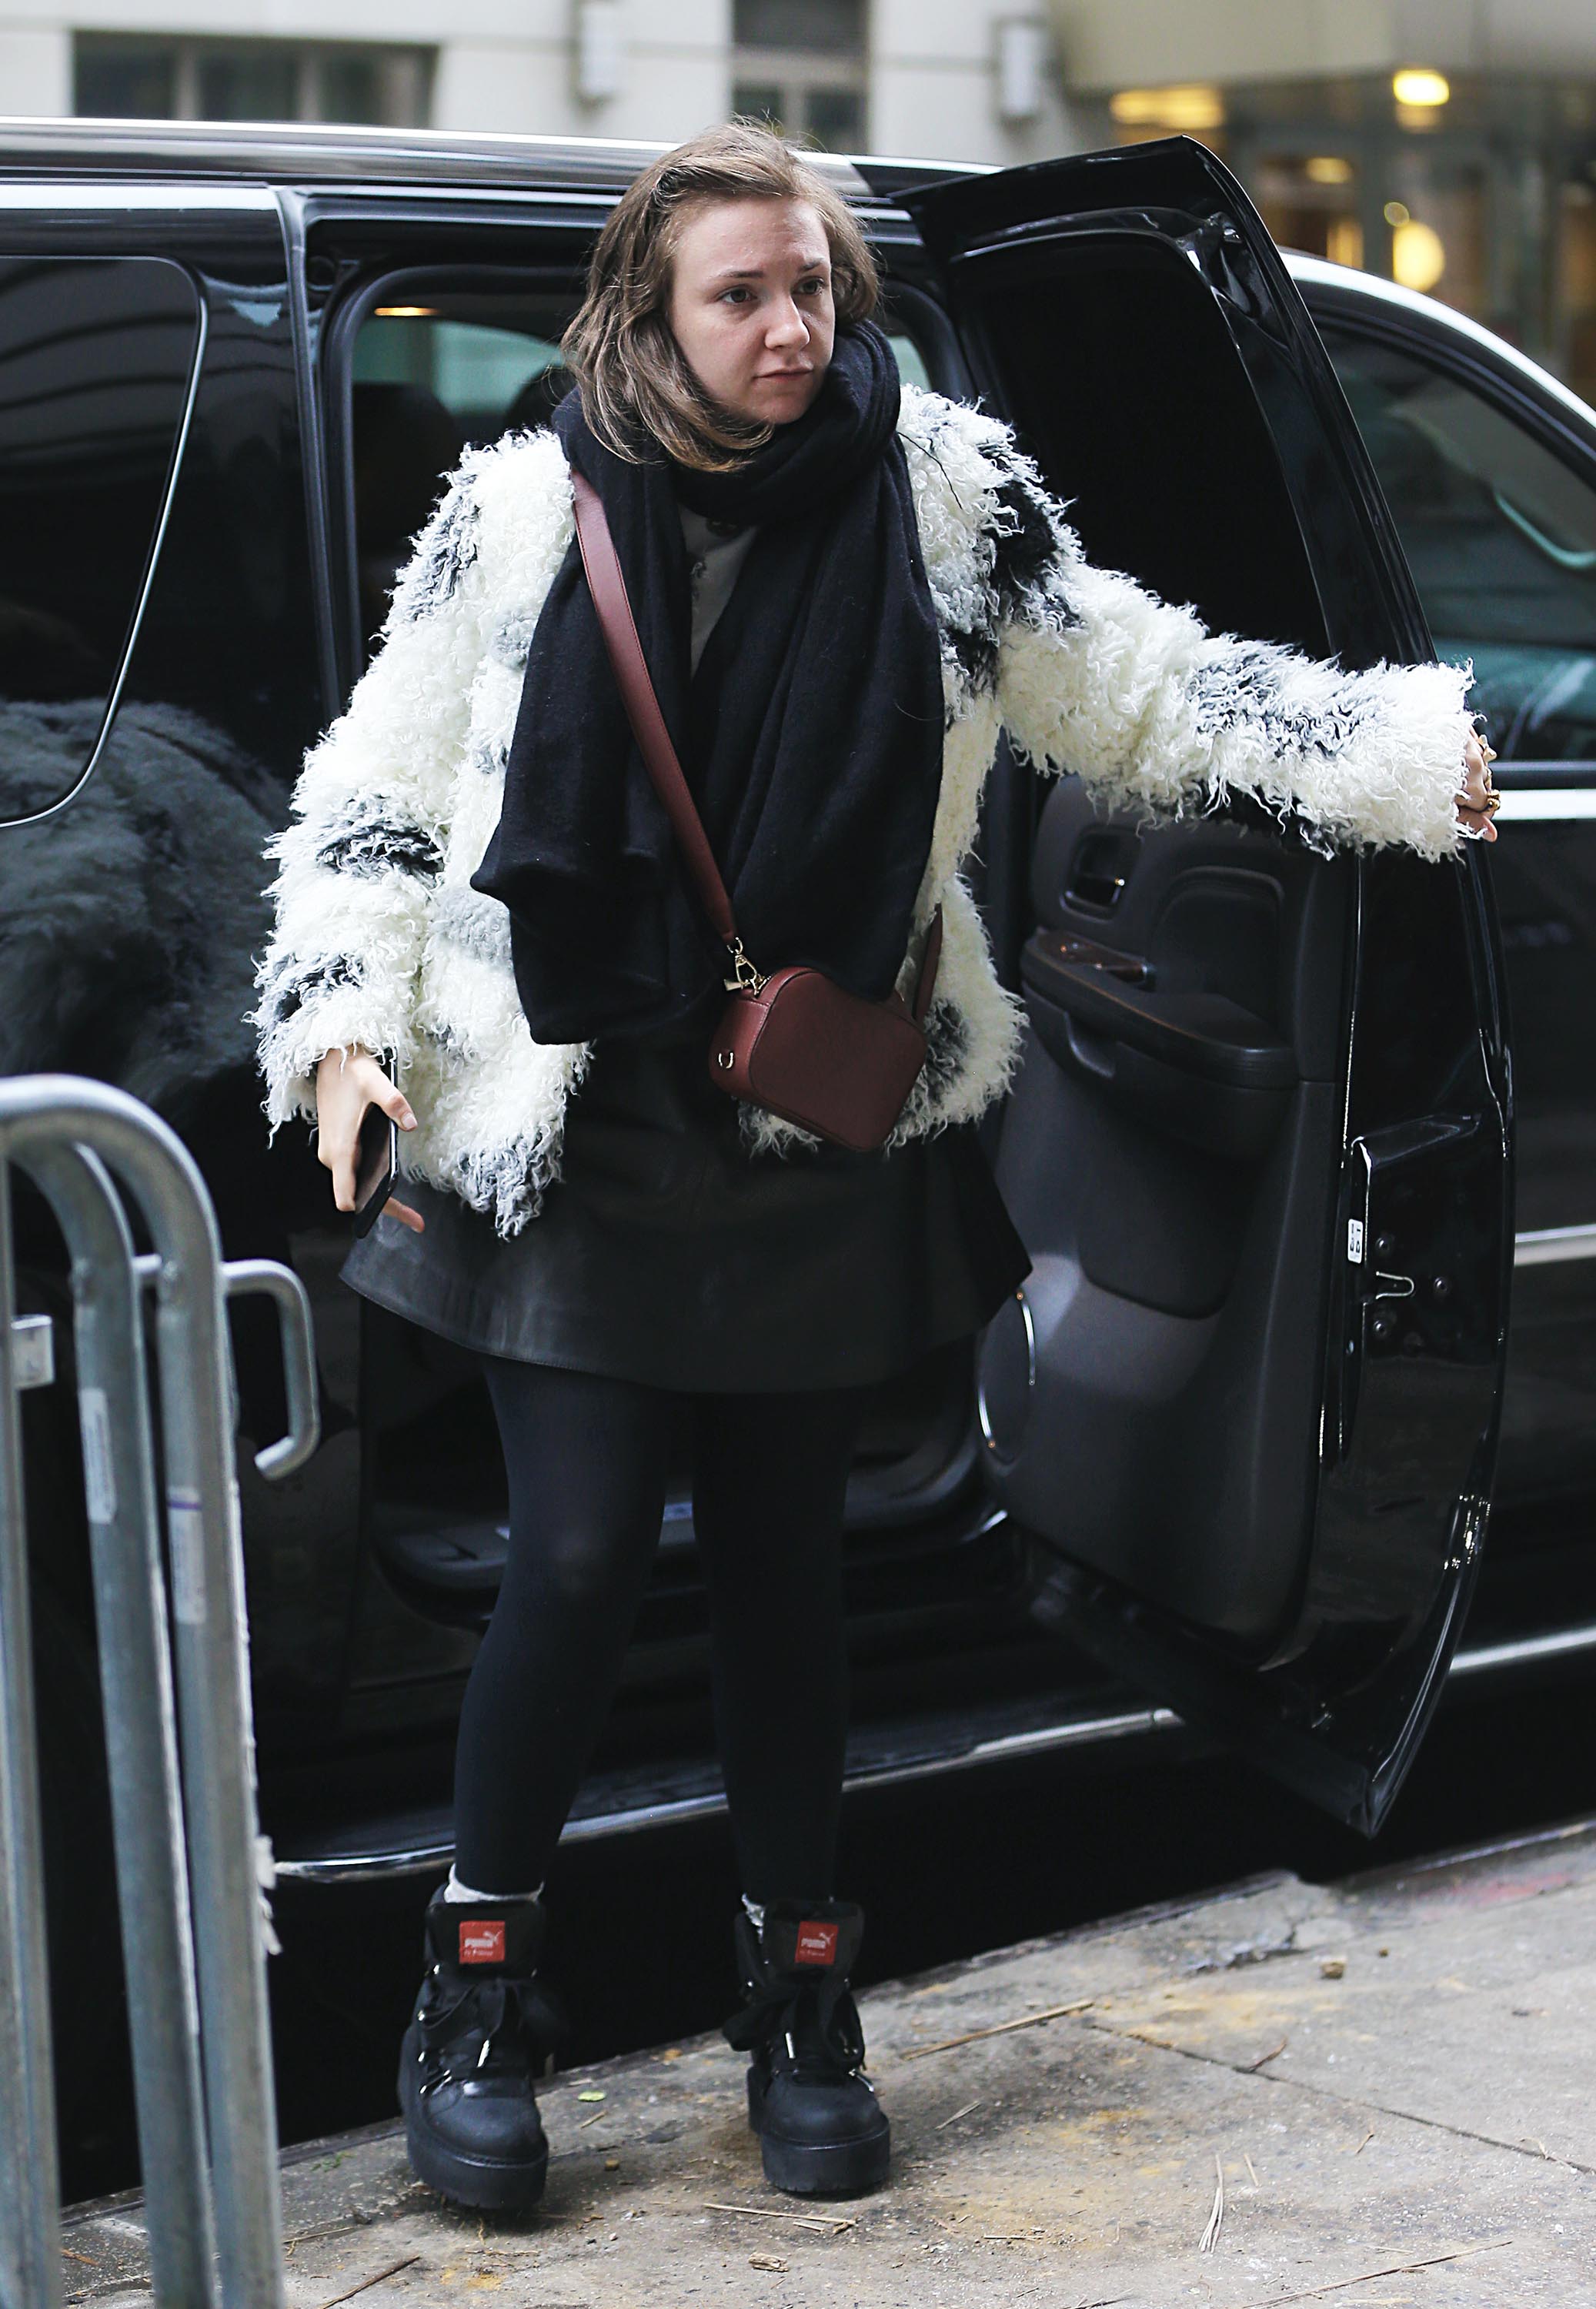 Lena Dunham out and about in NYC